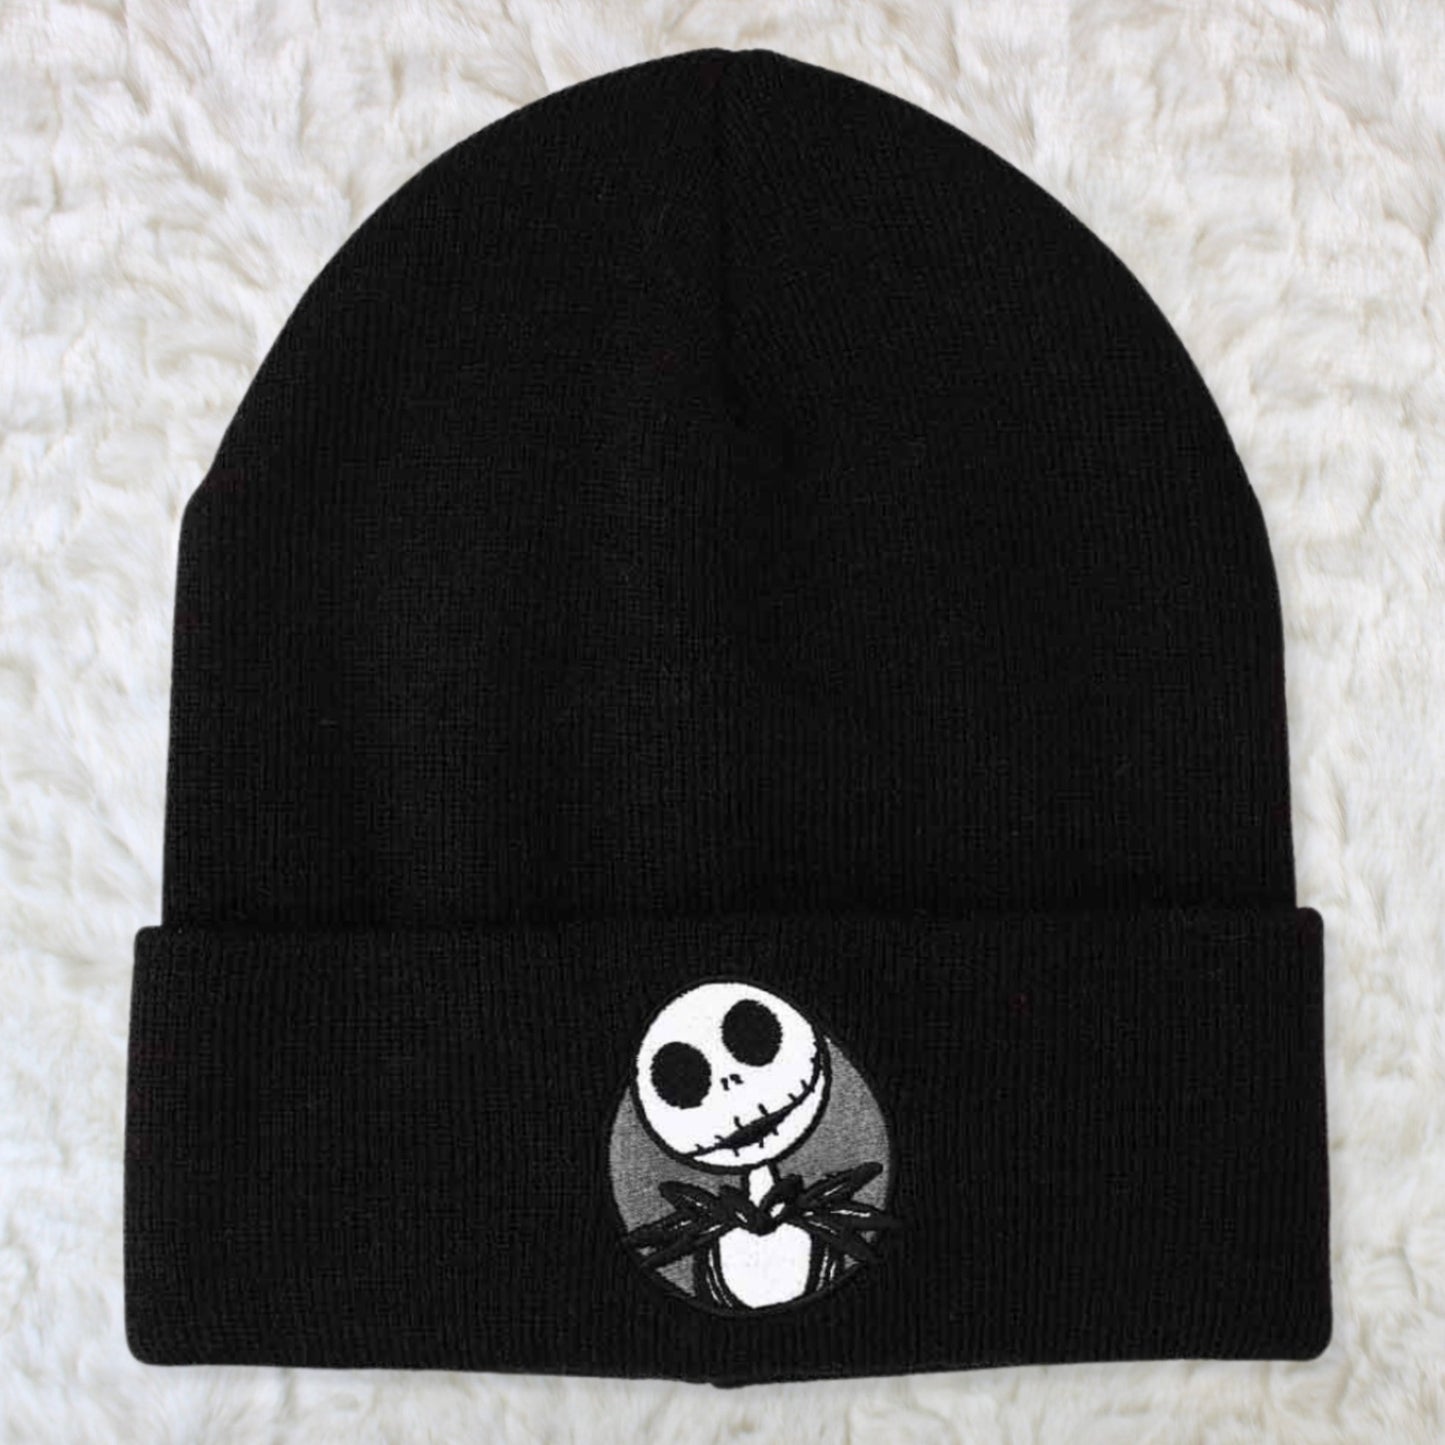 Jack Skellington Patch (Nightmare Before Christmas) Embroidered Cuff Beanie Hat